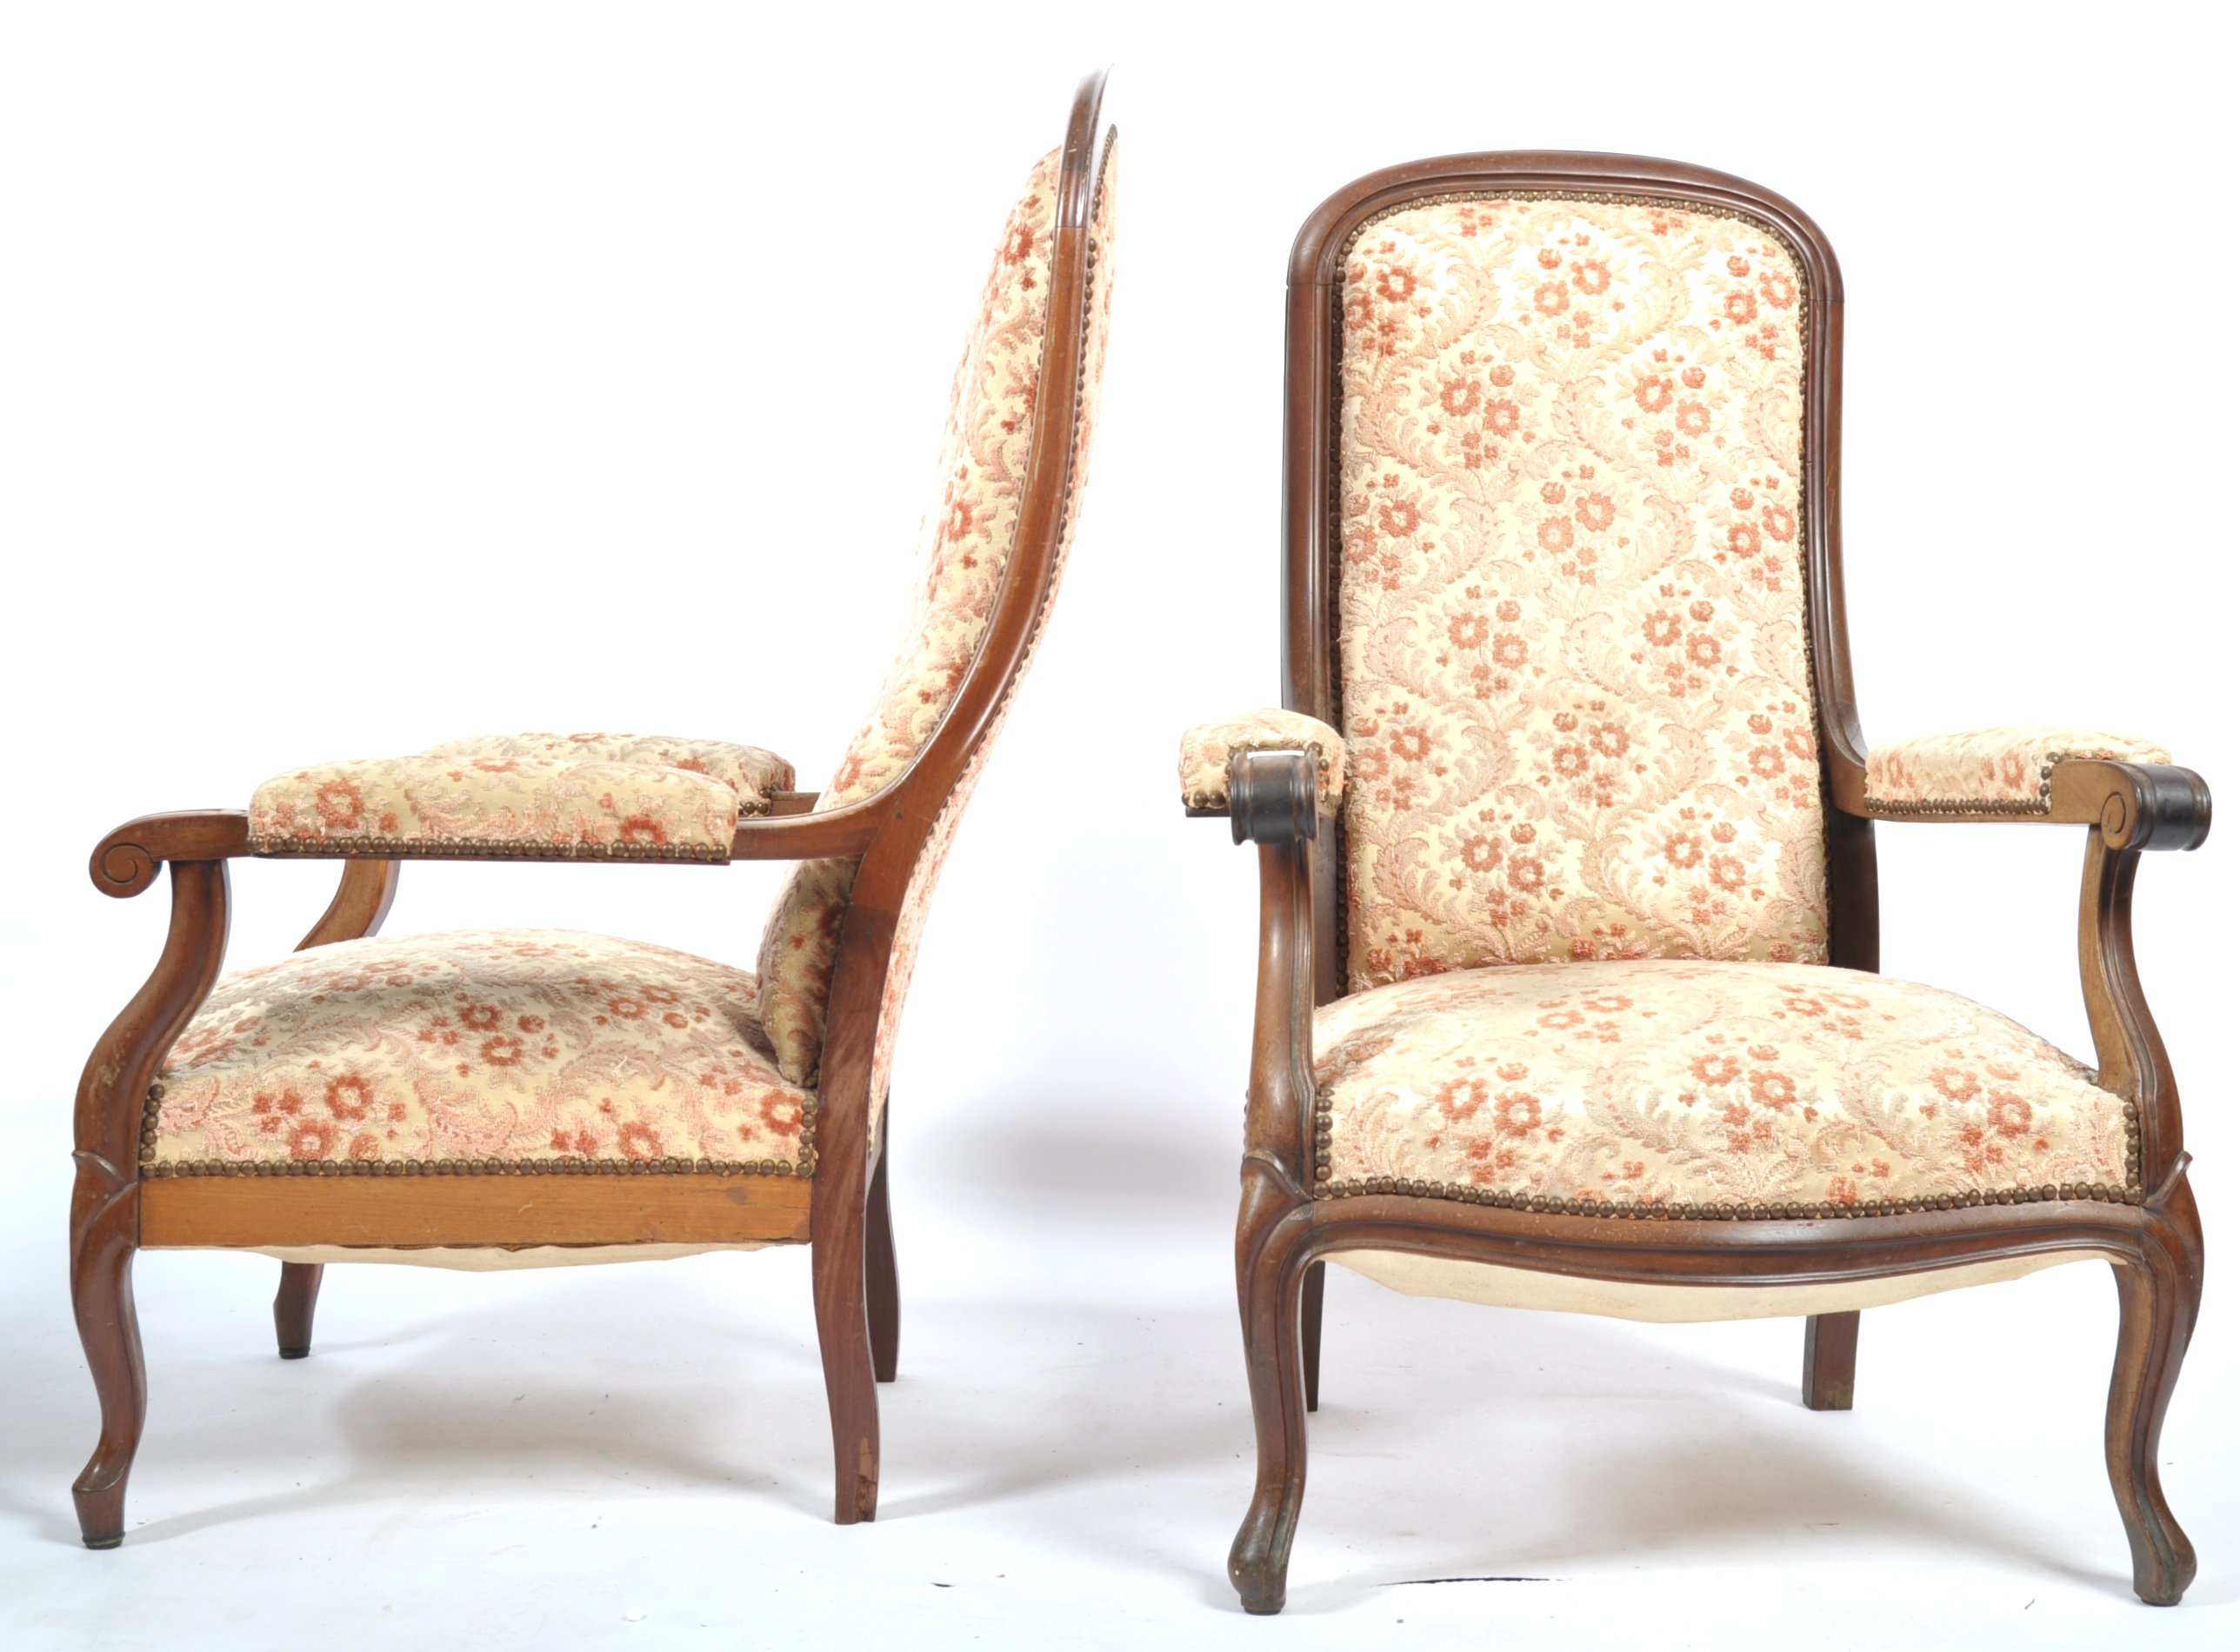 PAIR OF 19TH CENTURY FRENCH HIS AND HERS ARMCHAIRS - Image 4 of 6